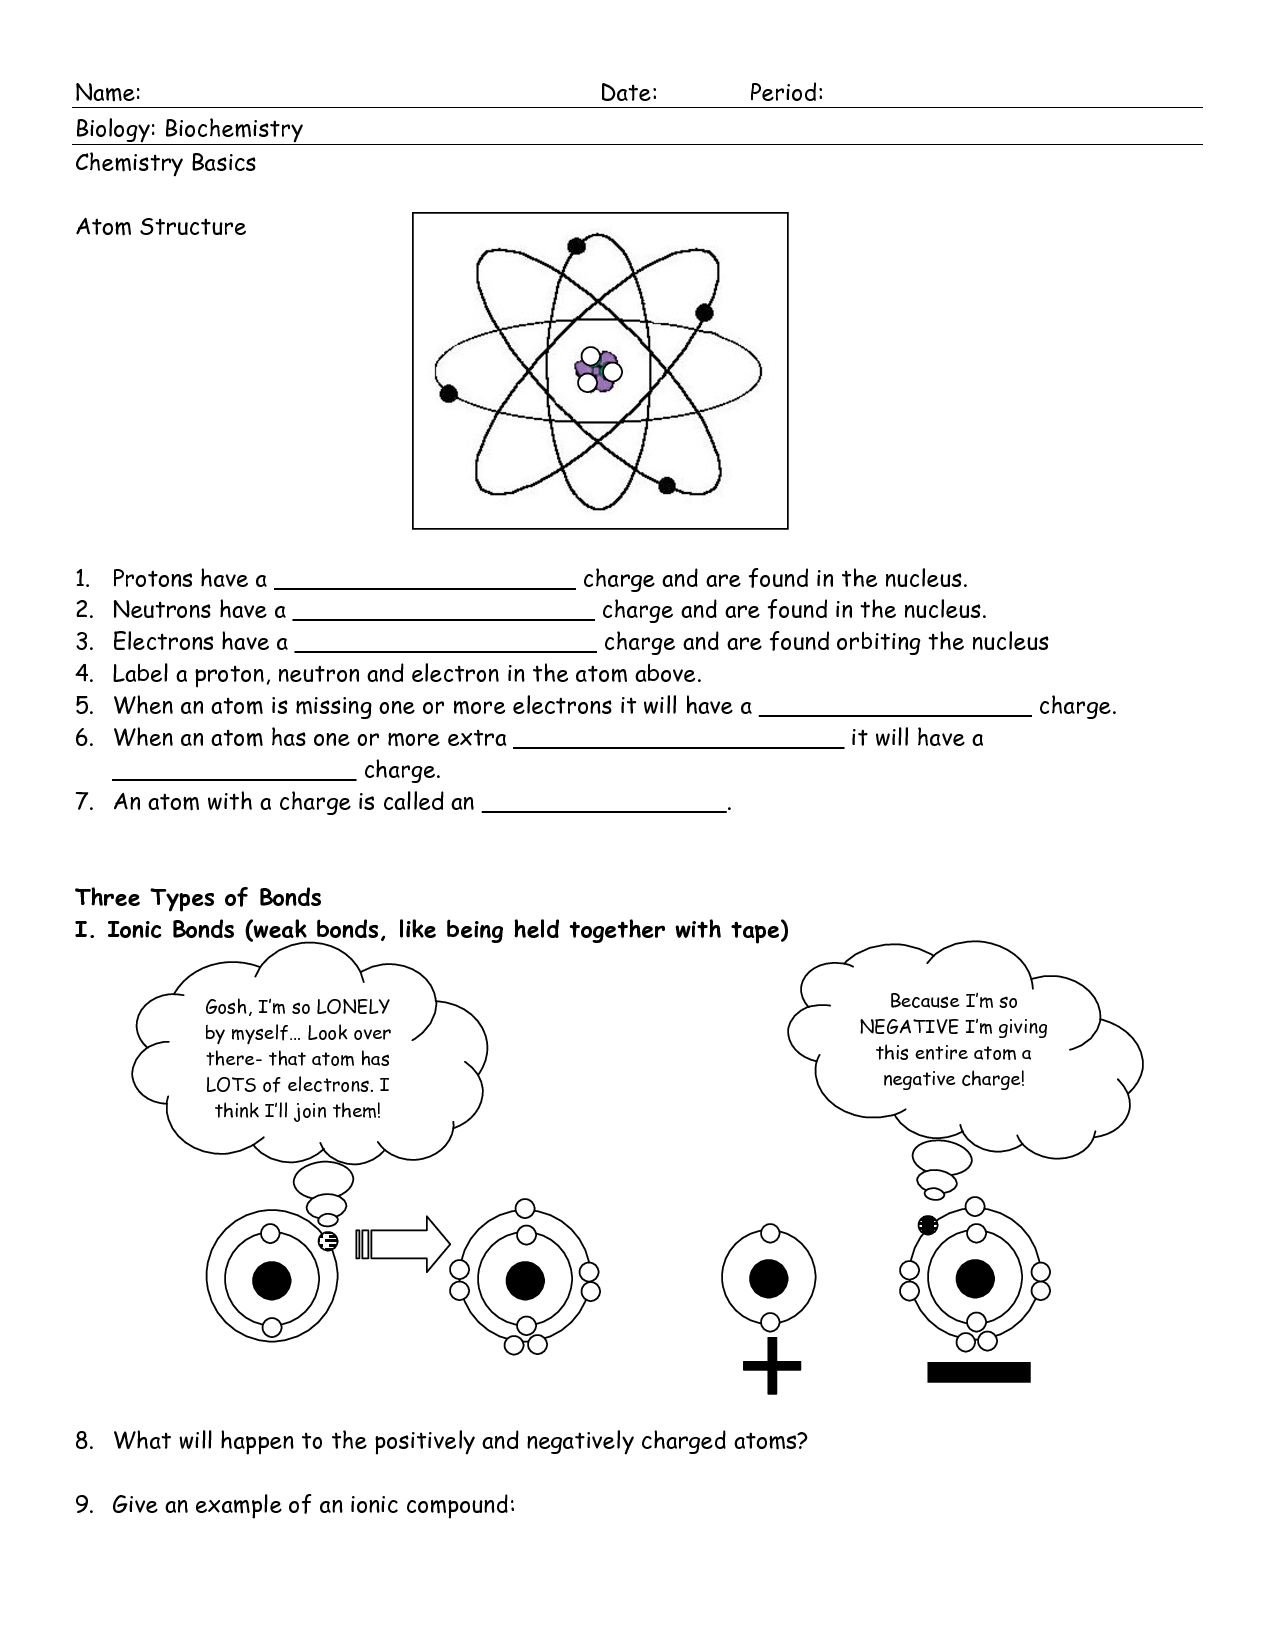 cipponeri25269-atomic-structure-worksheet-answer-key-chapter-5